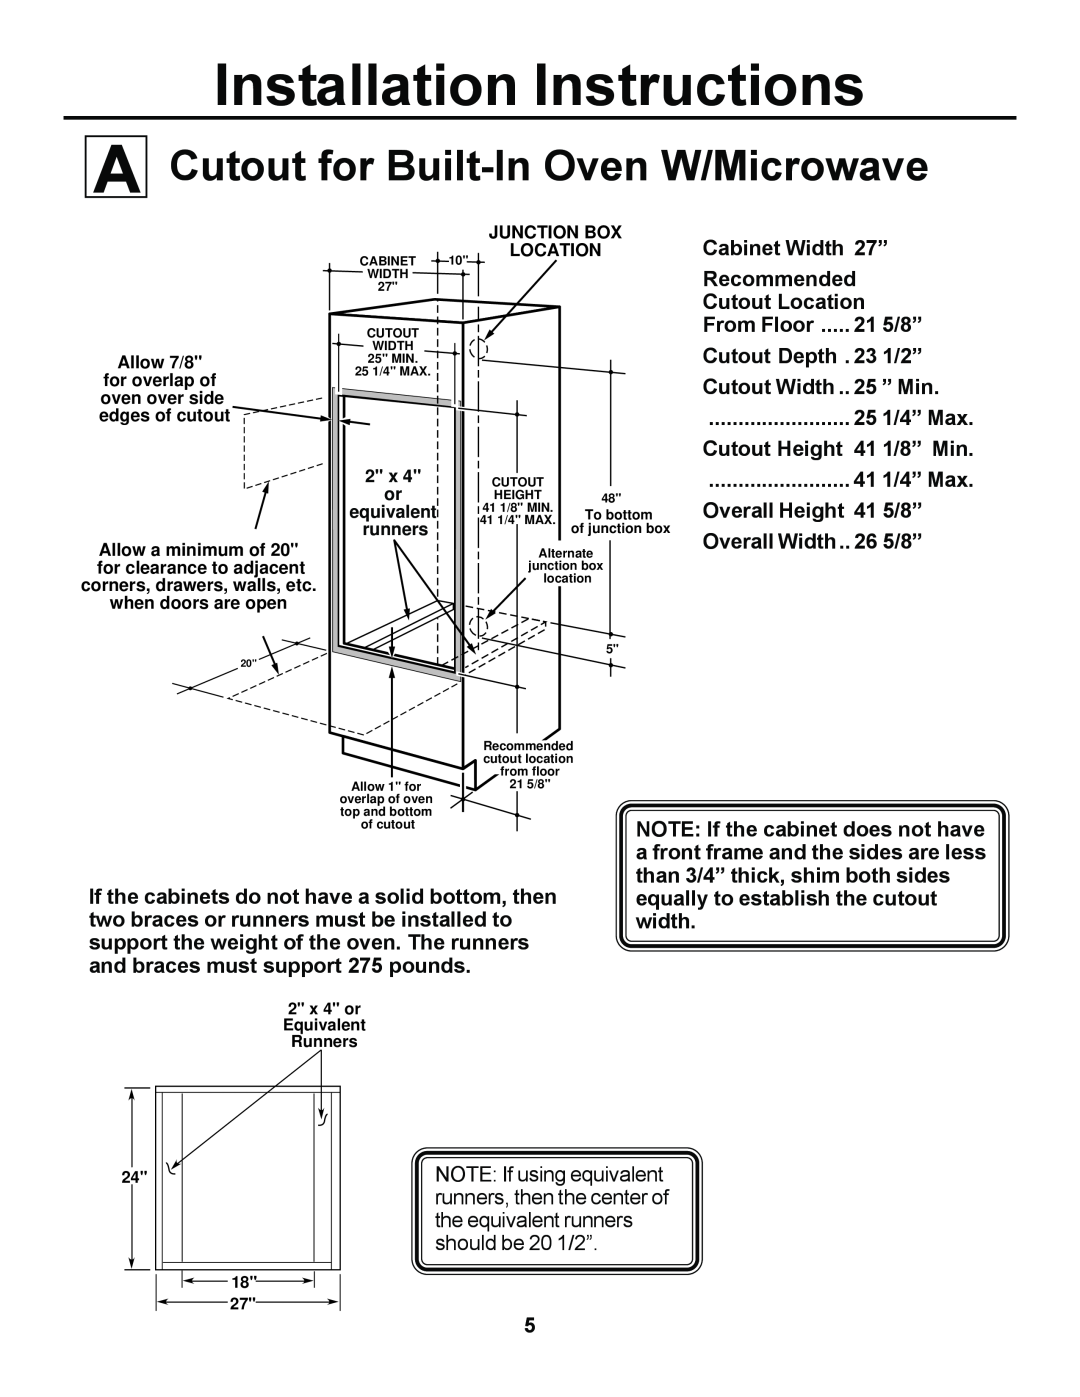 Cowon Systems JKP85 installation instructions Cutout for Built-In Oven W/Microwave, Installation Instructions 